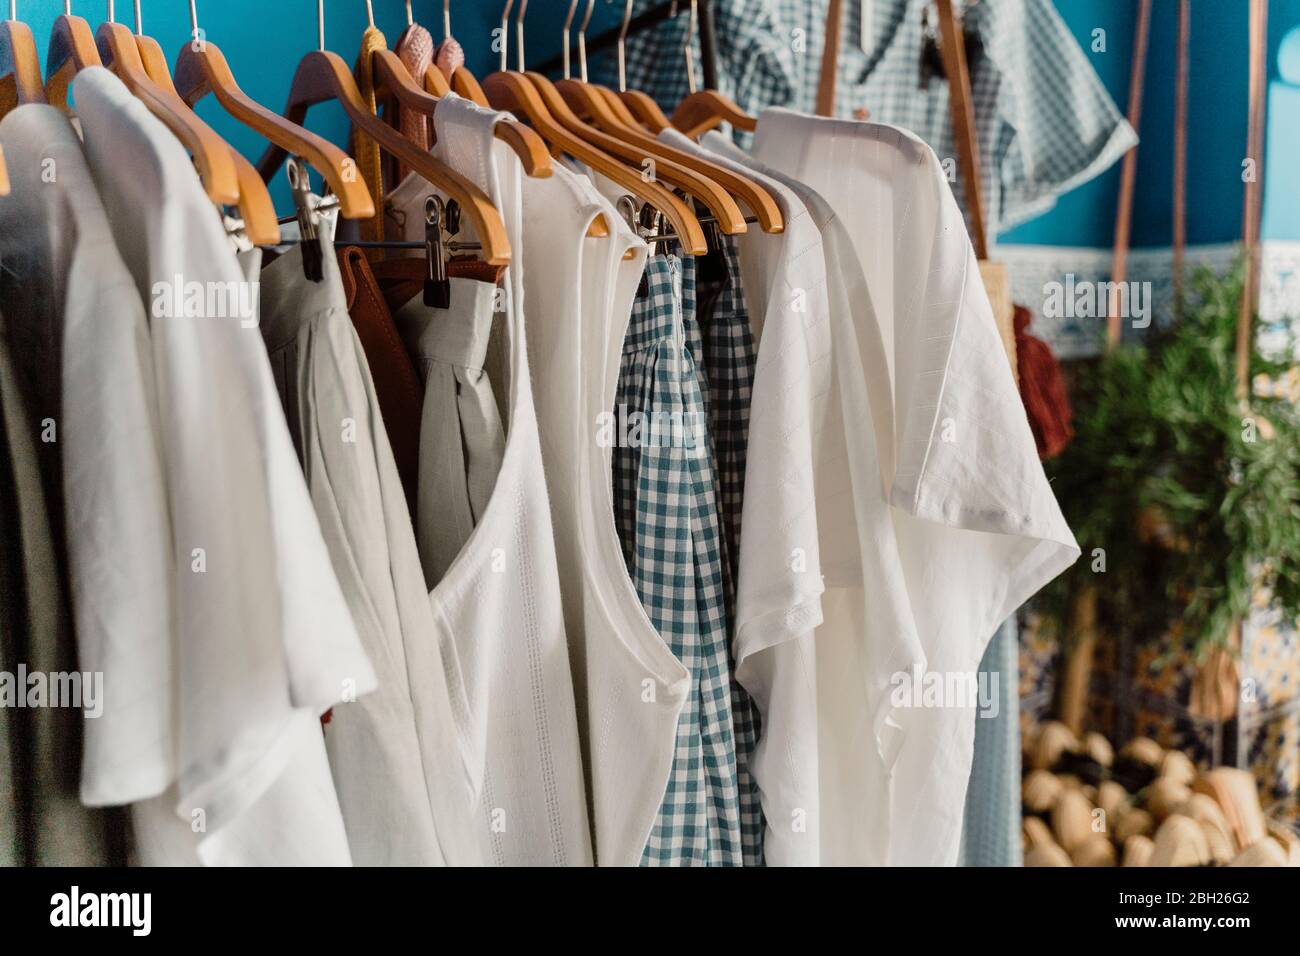 Morocco, T-shirts and tank tops hanging on clothes rack Stock Photo